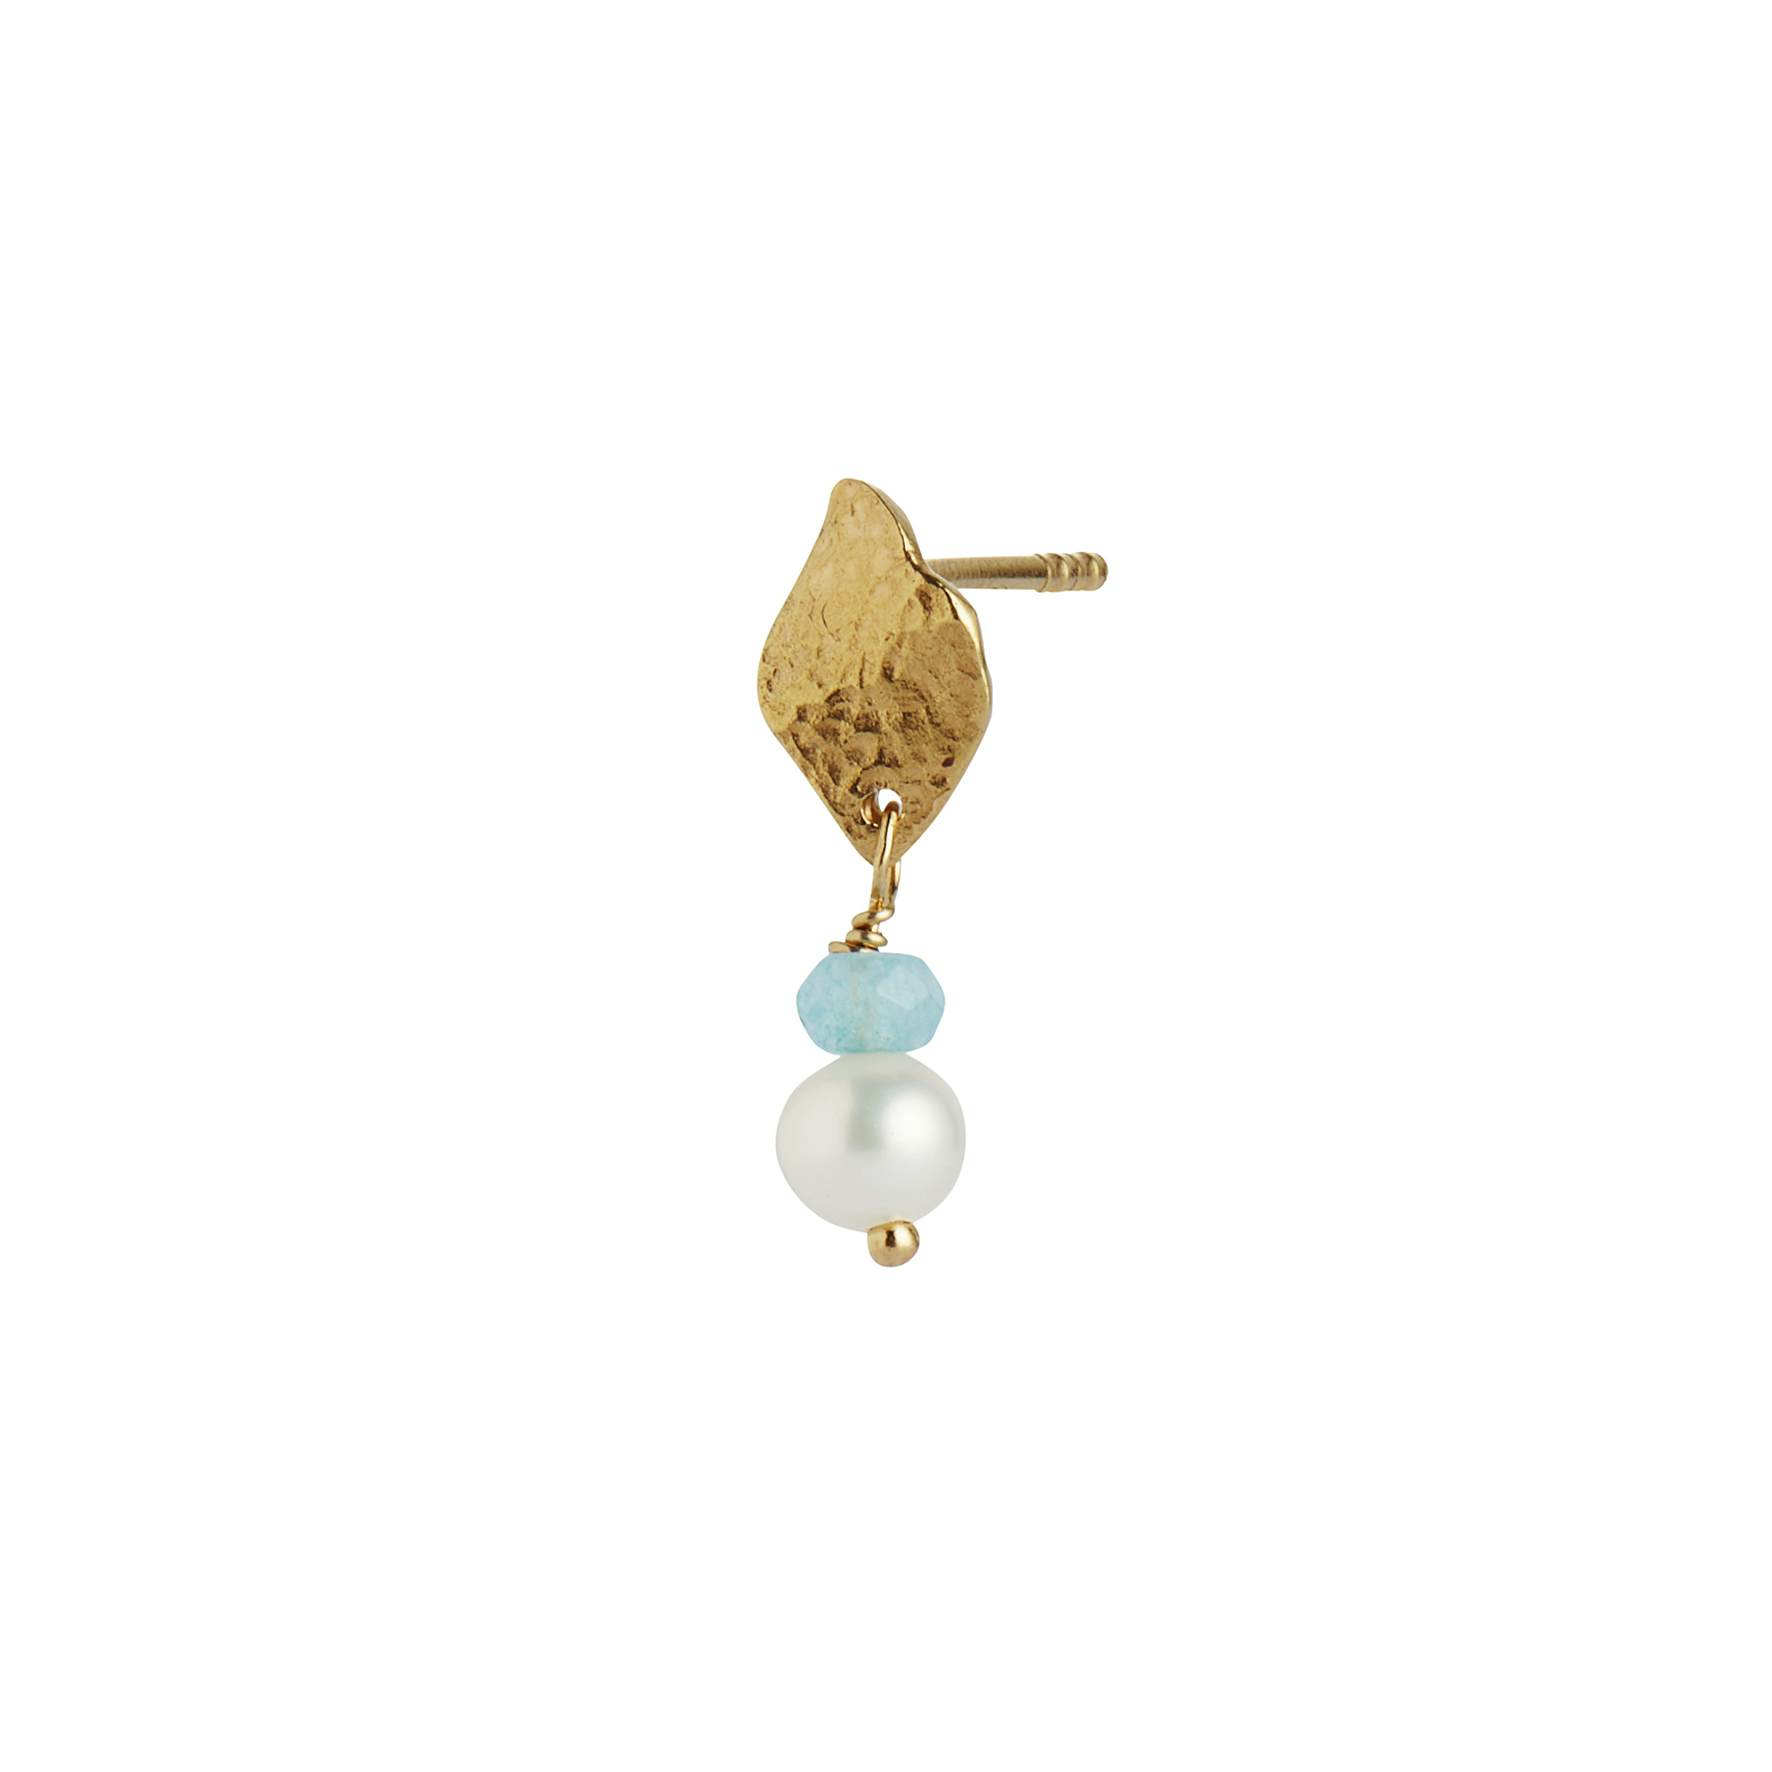 Ile De L'Amour with Pearl and Light Blue Topaz Earring von STINE A Jewelry in Vergoldet-Silber Sterling 925